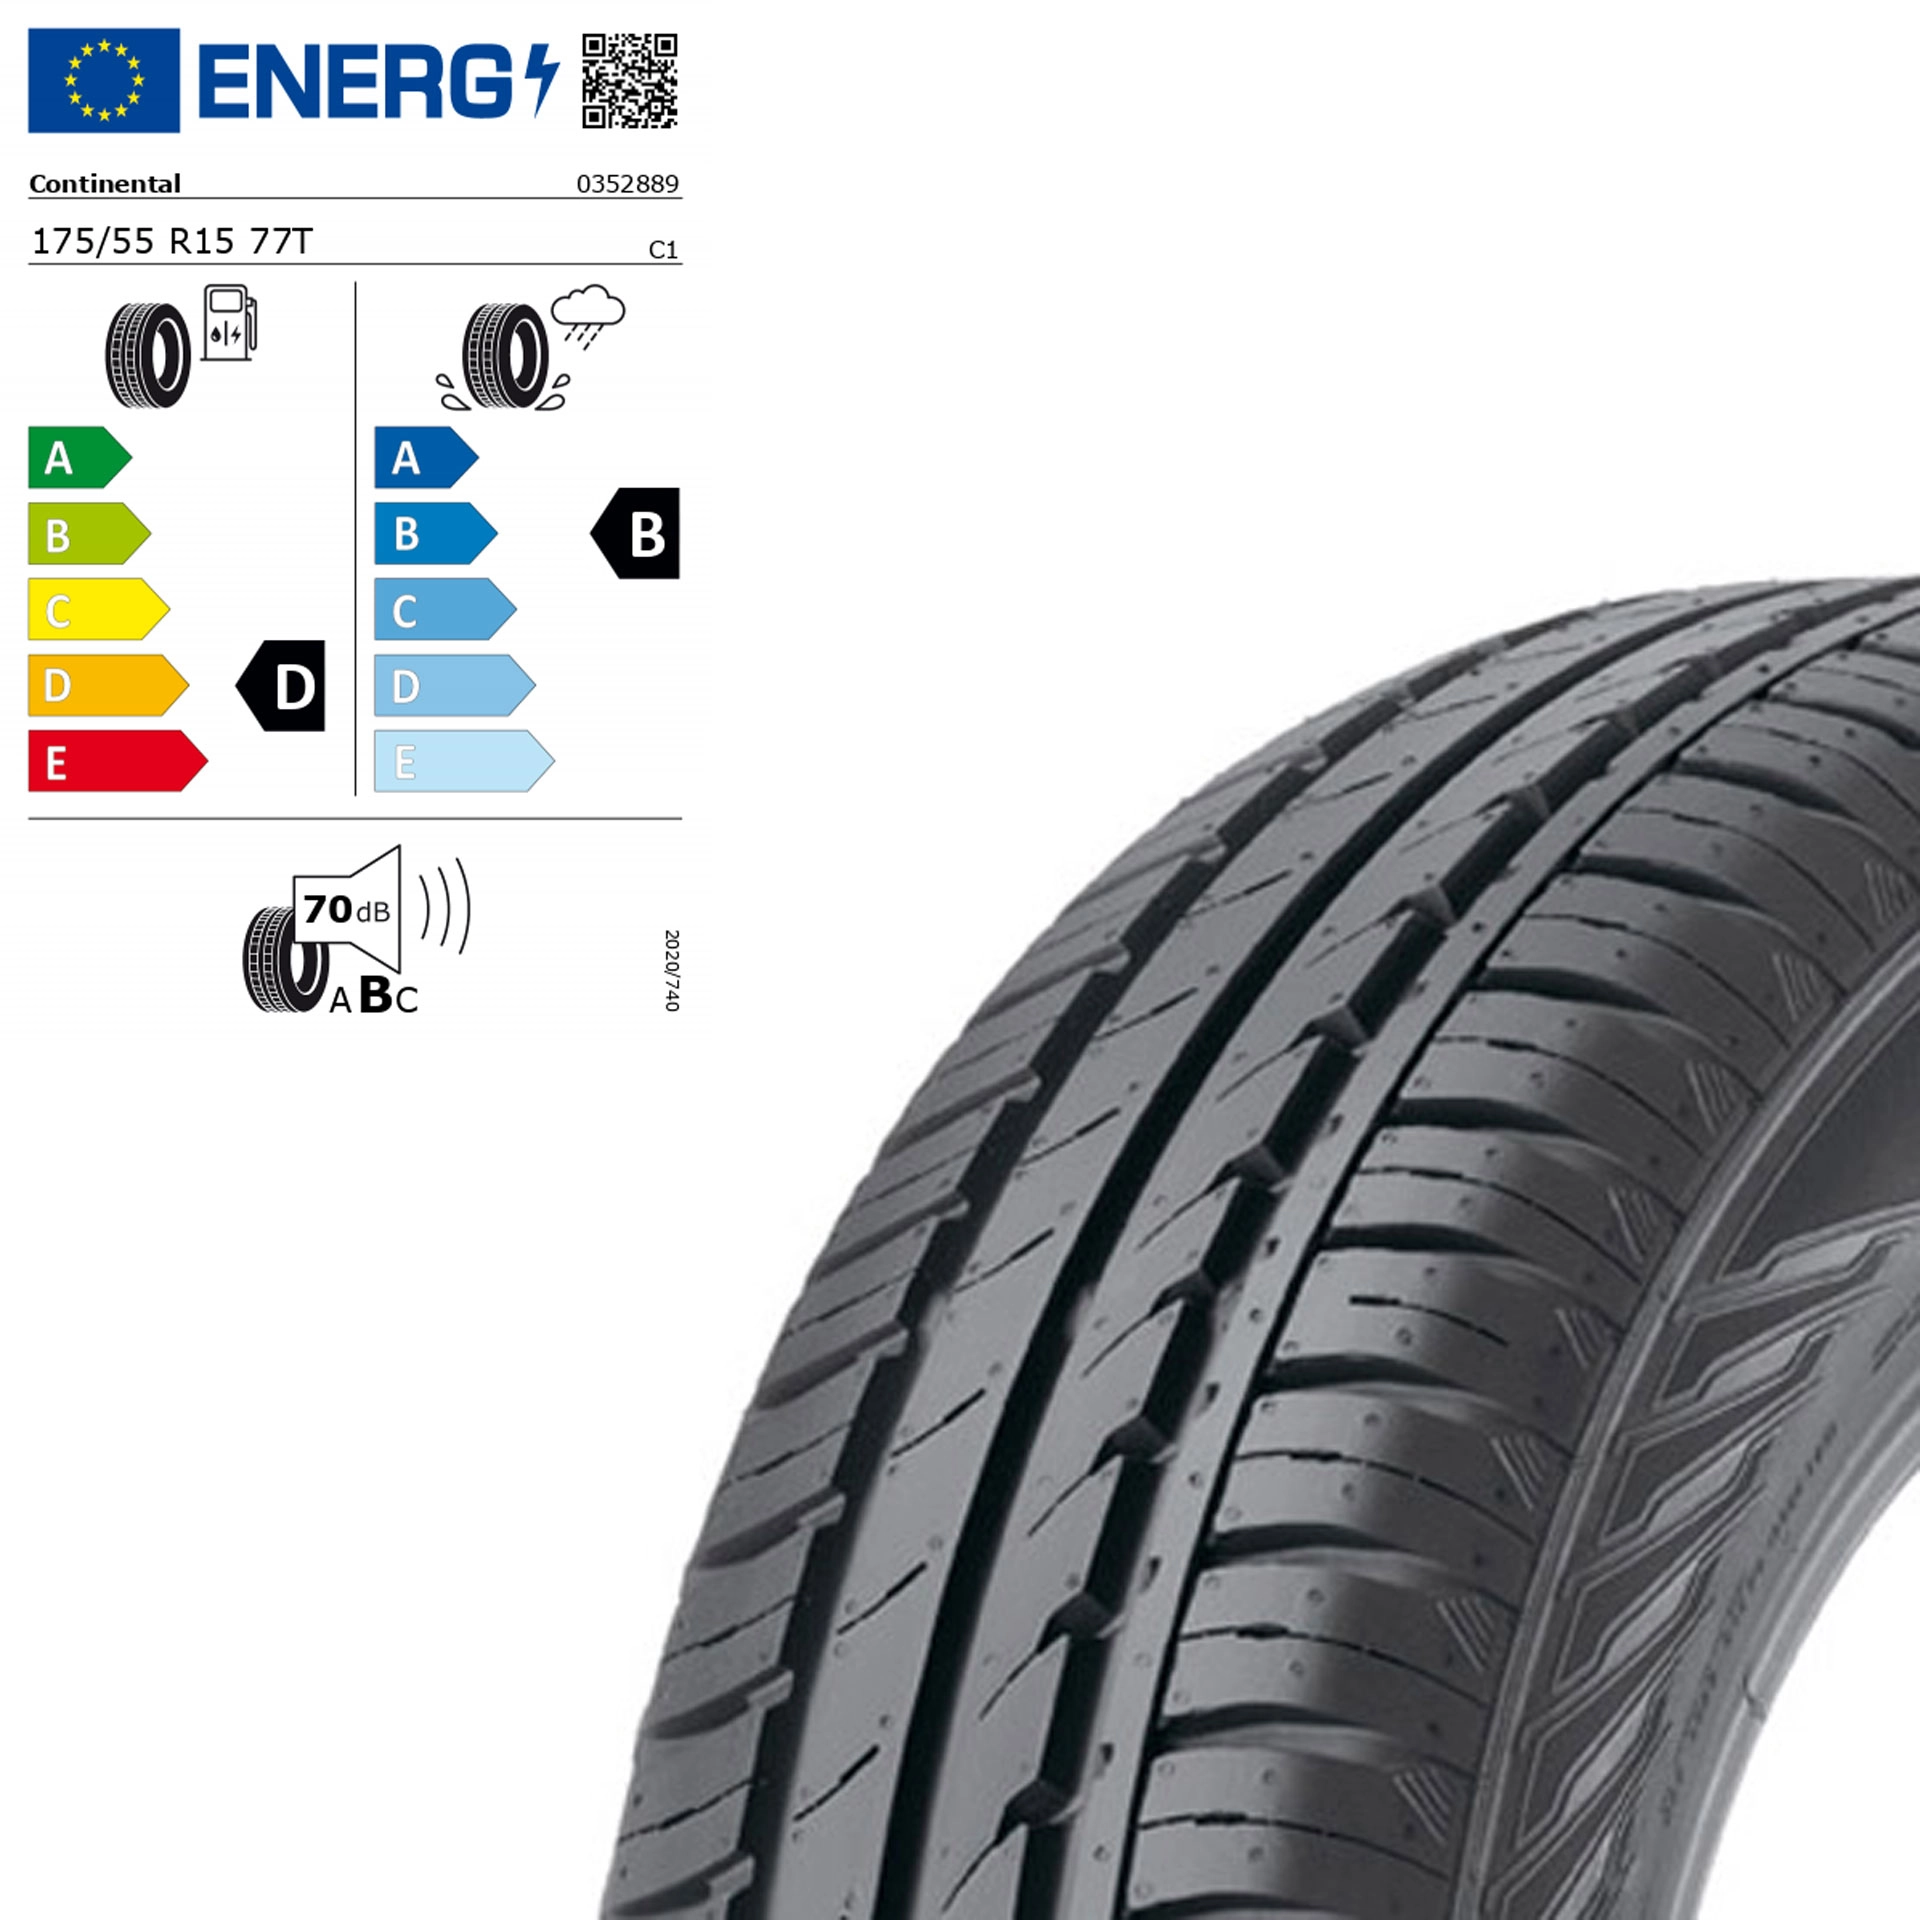 175/55 R15 77T Continental ContiEcoContact 3 - Sommerreifen Q44003111123A